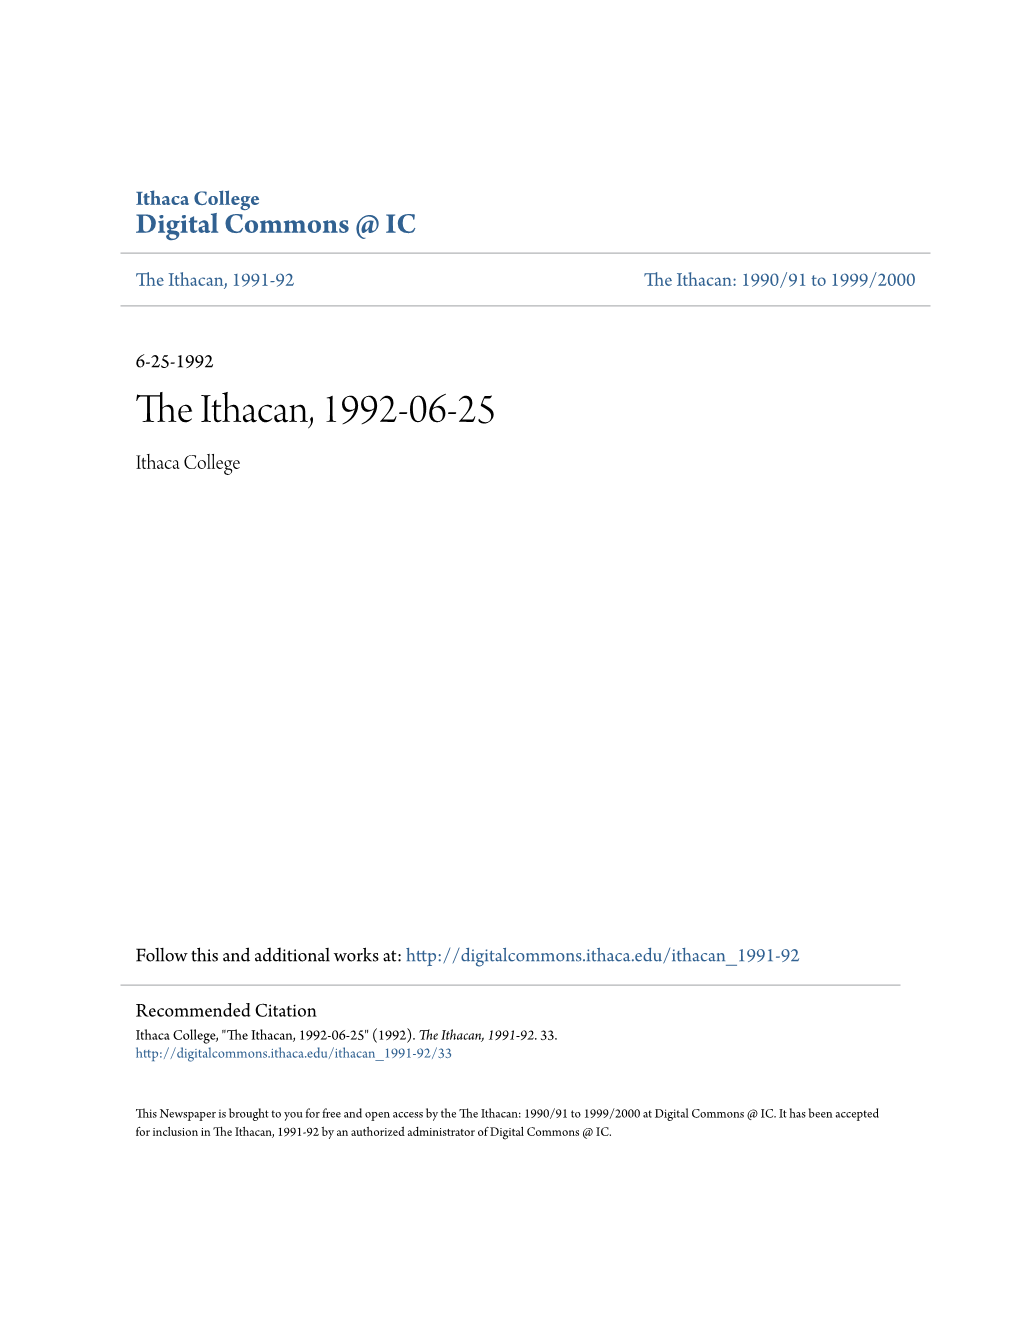 The Ithacan, 1992-06-25